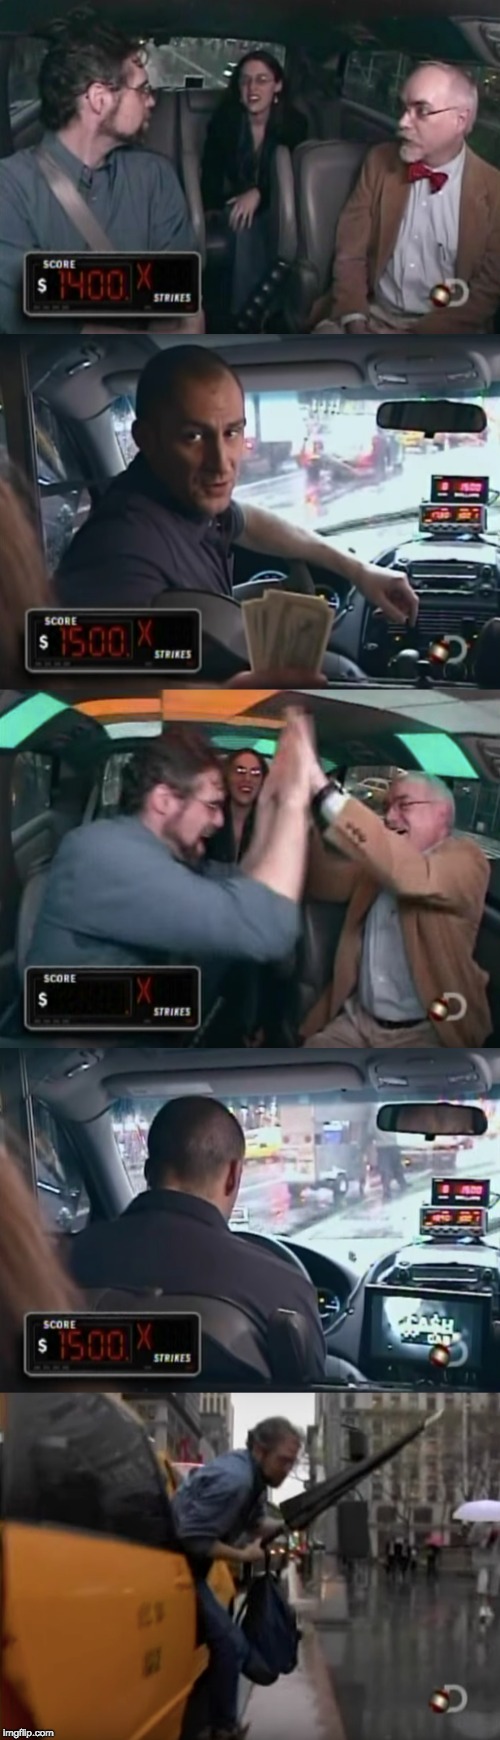 Cash Cab | image tagged in cash | made w/ Imgflip meme maker